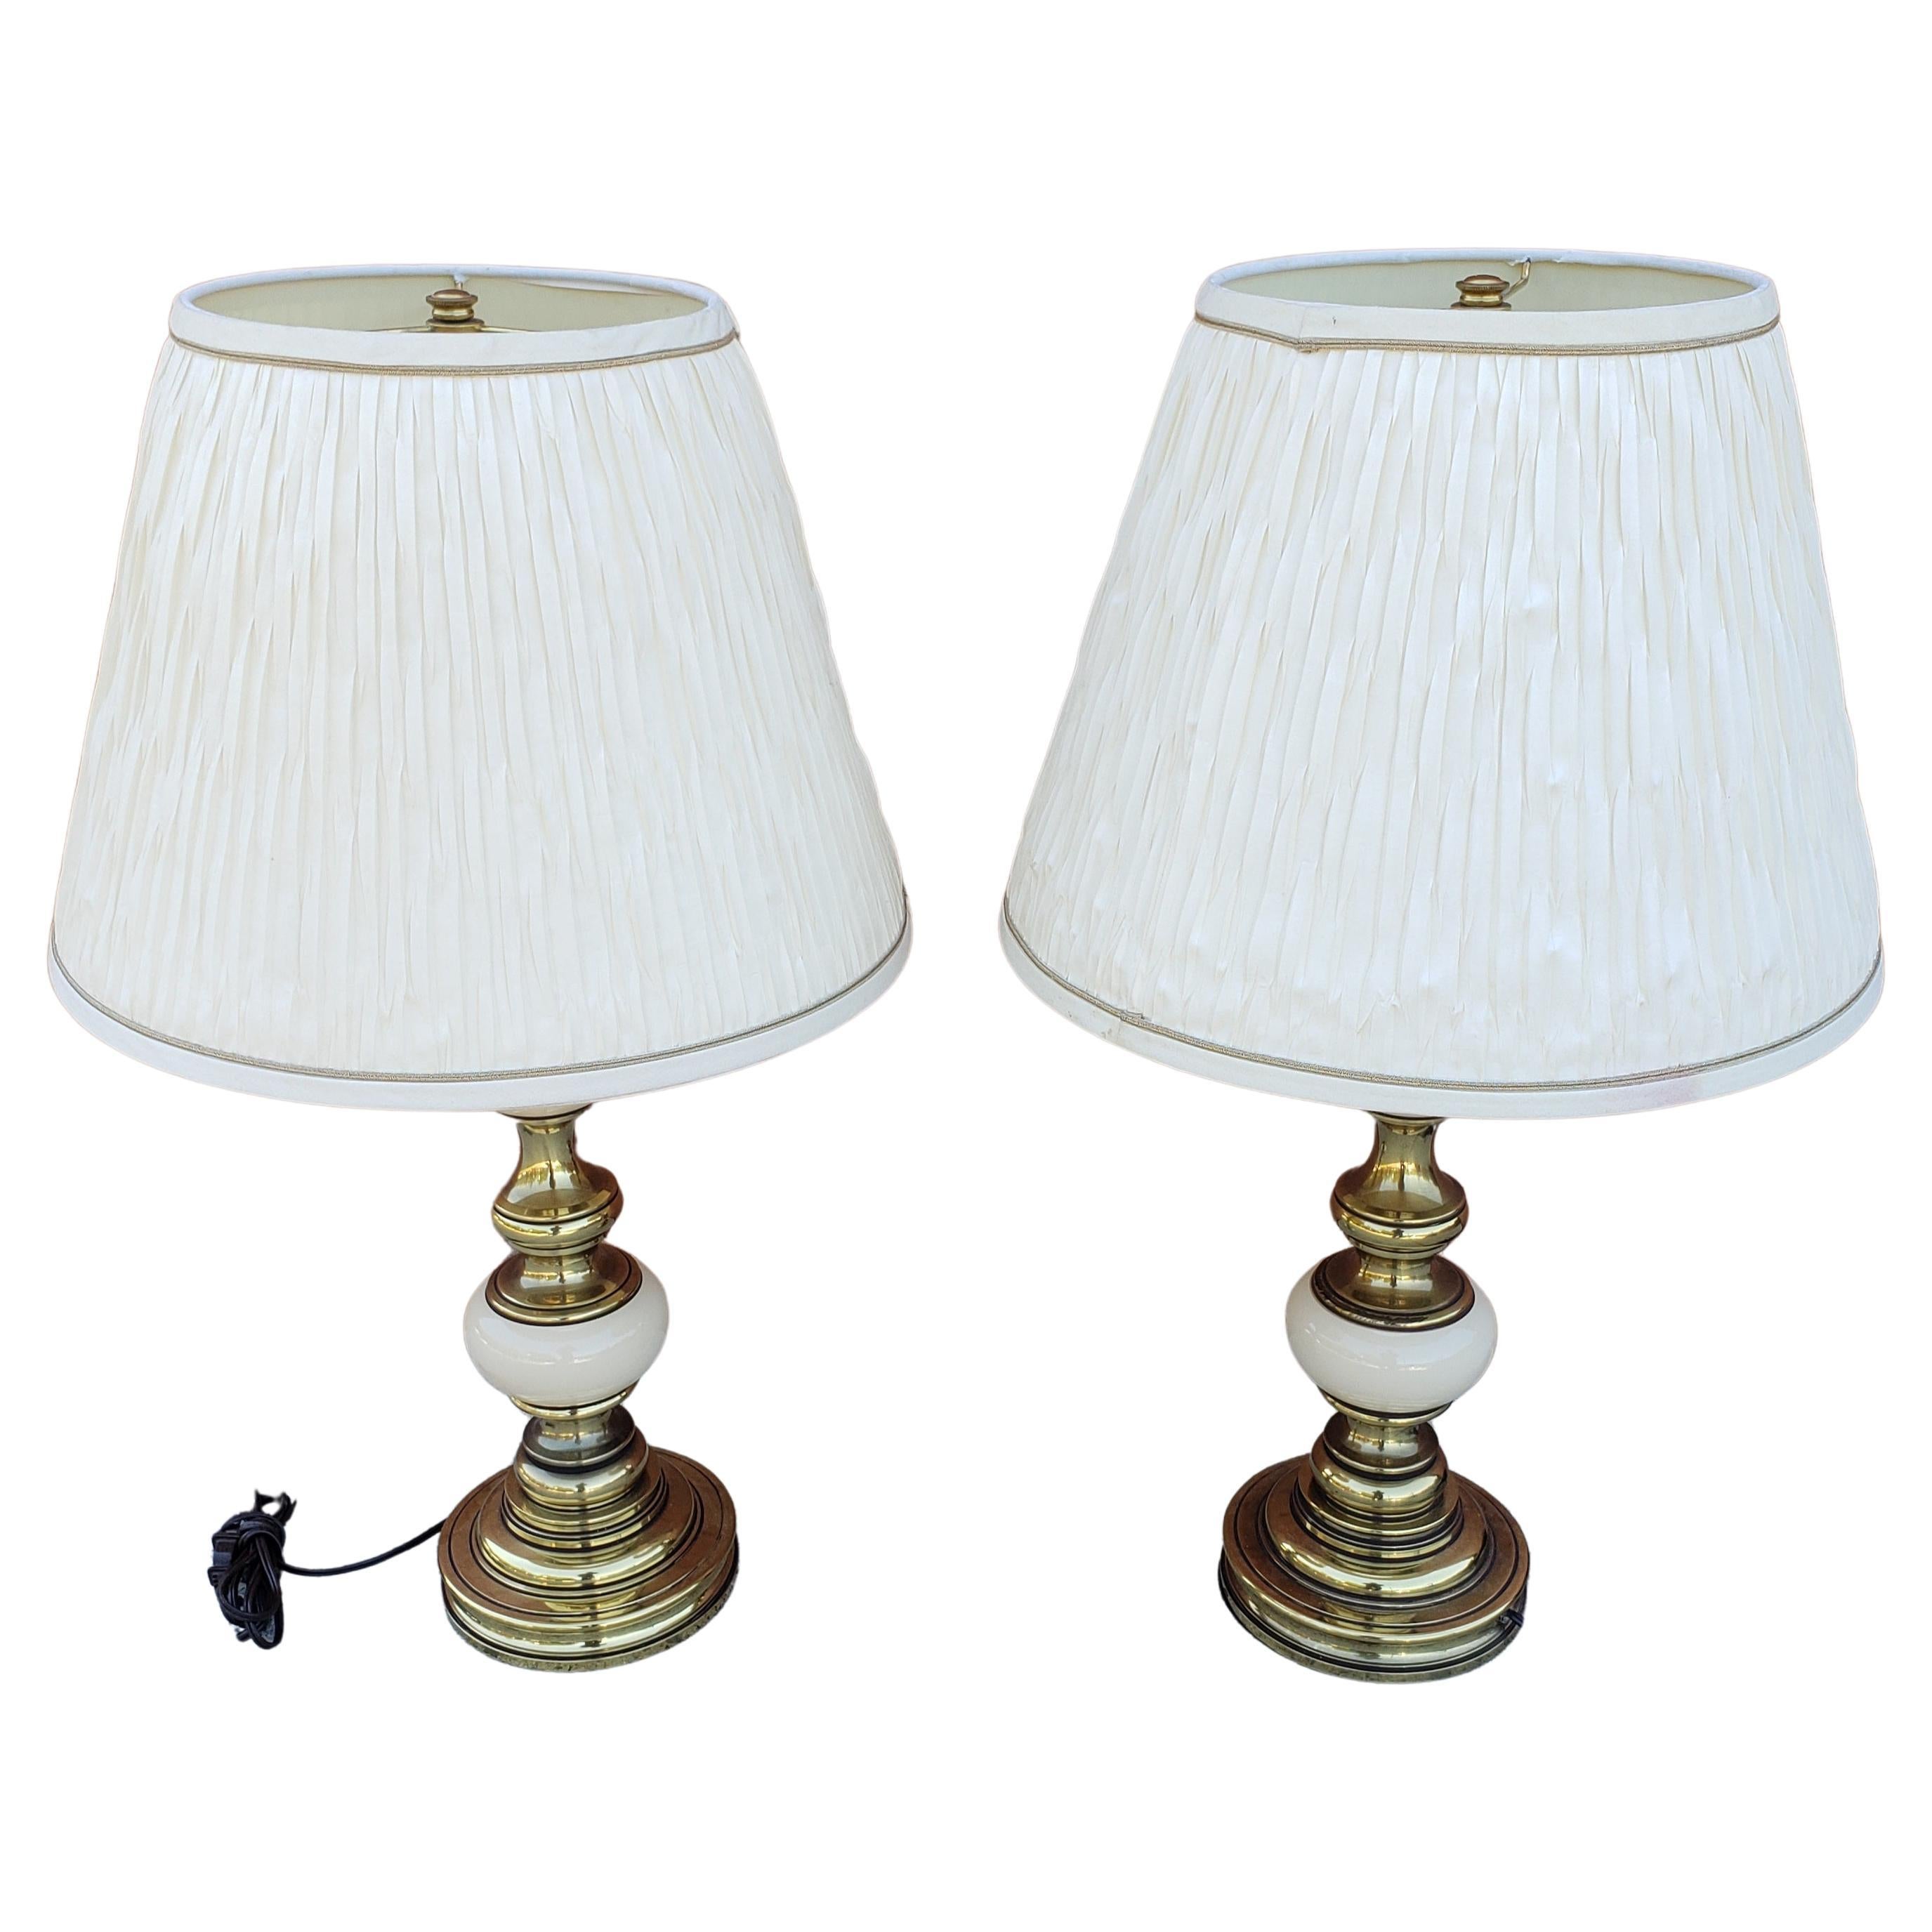 Pair of Stiffel Heavy Brass and Porcelain Table Lamps In Good Condition For Sale In Germantown, MD